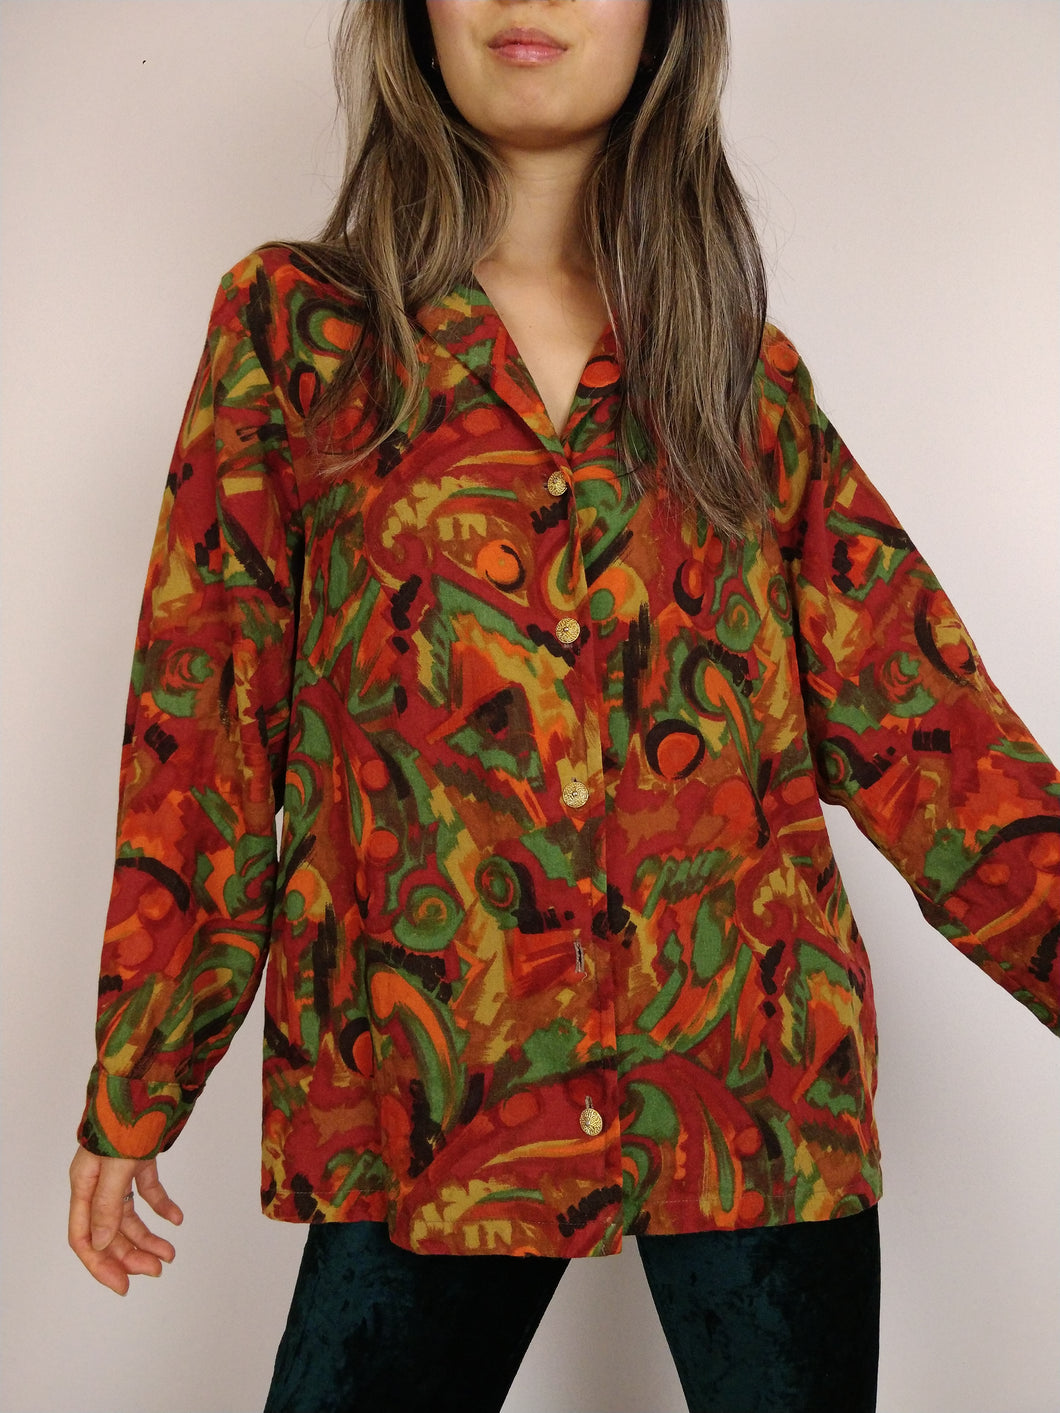 The Red Earth | Vintage shirt blouse abstract print pattern long sleeve red orange brown M